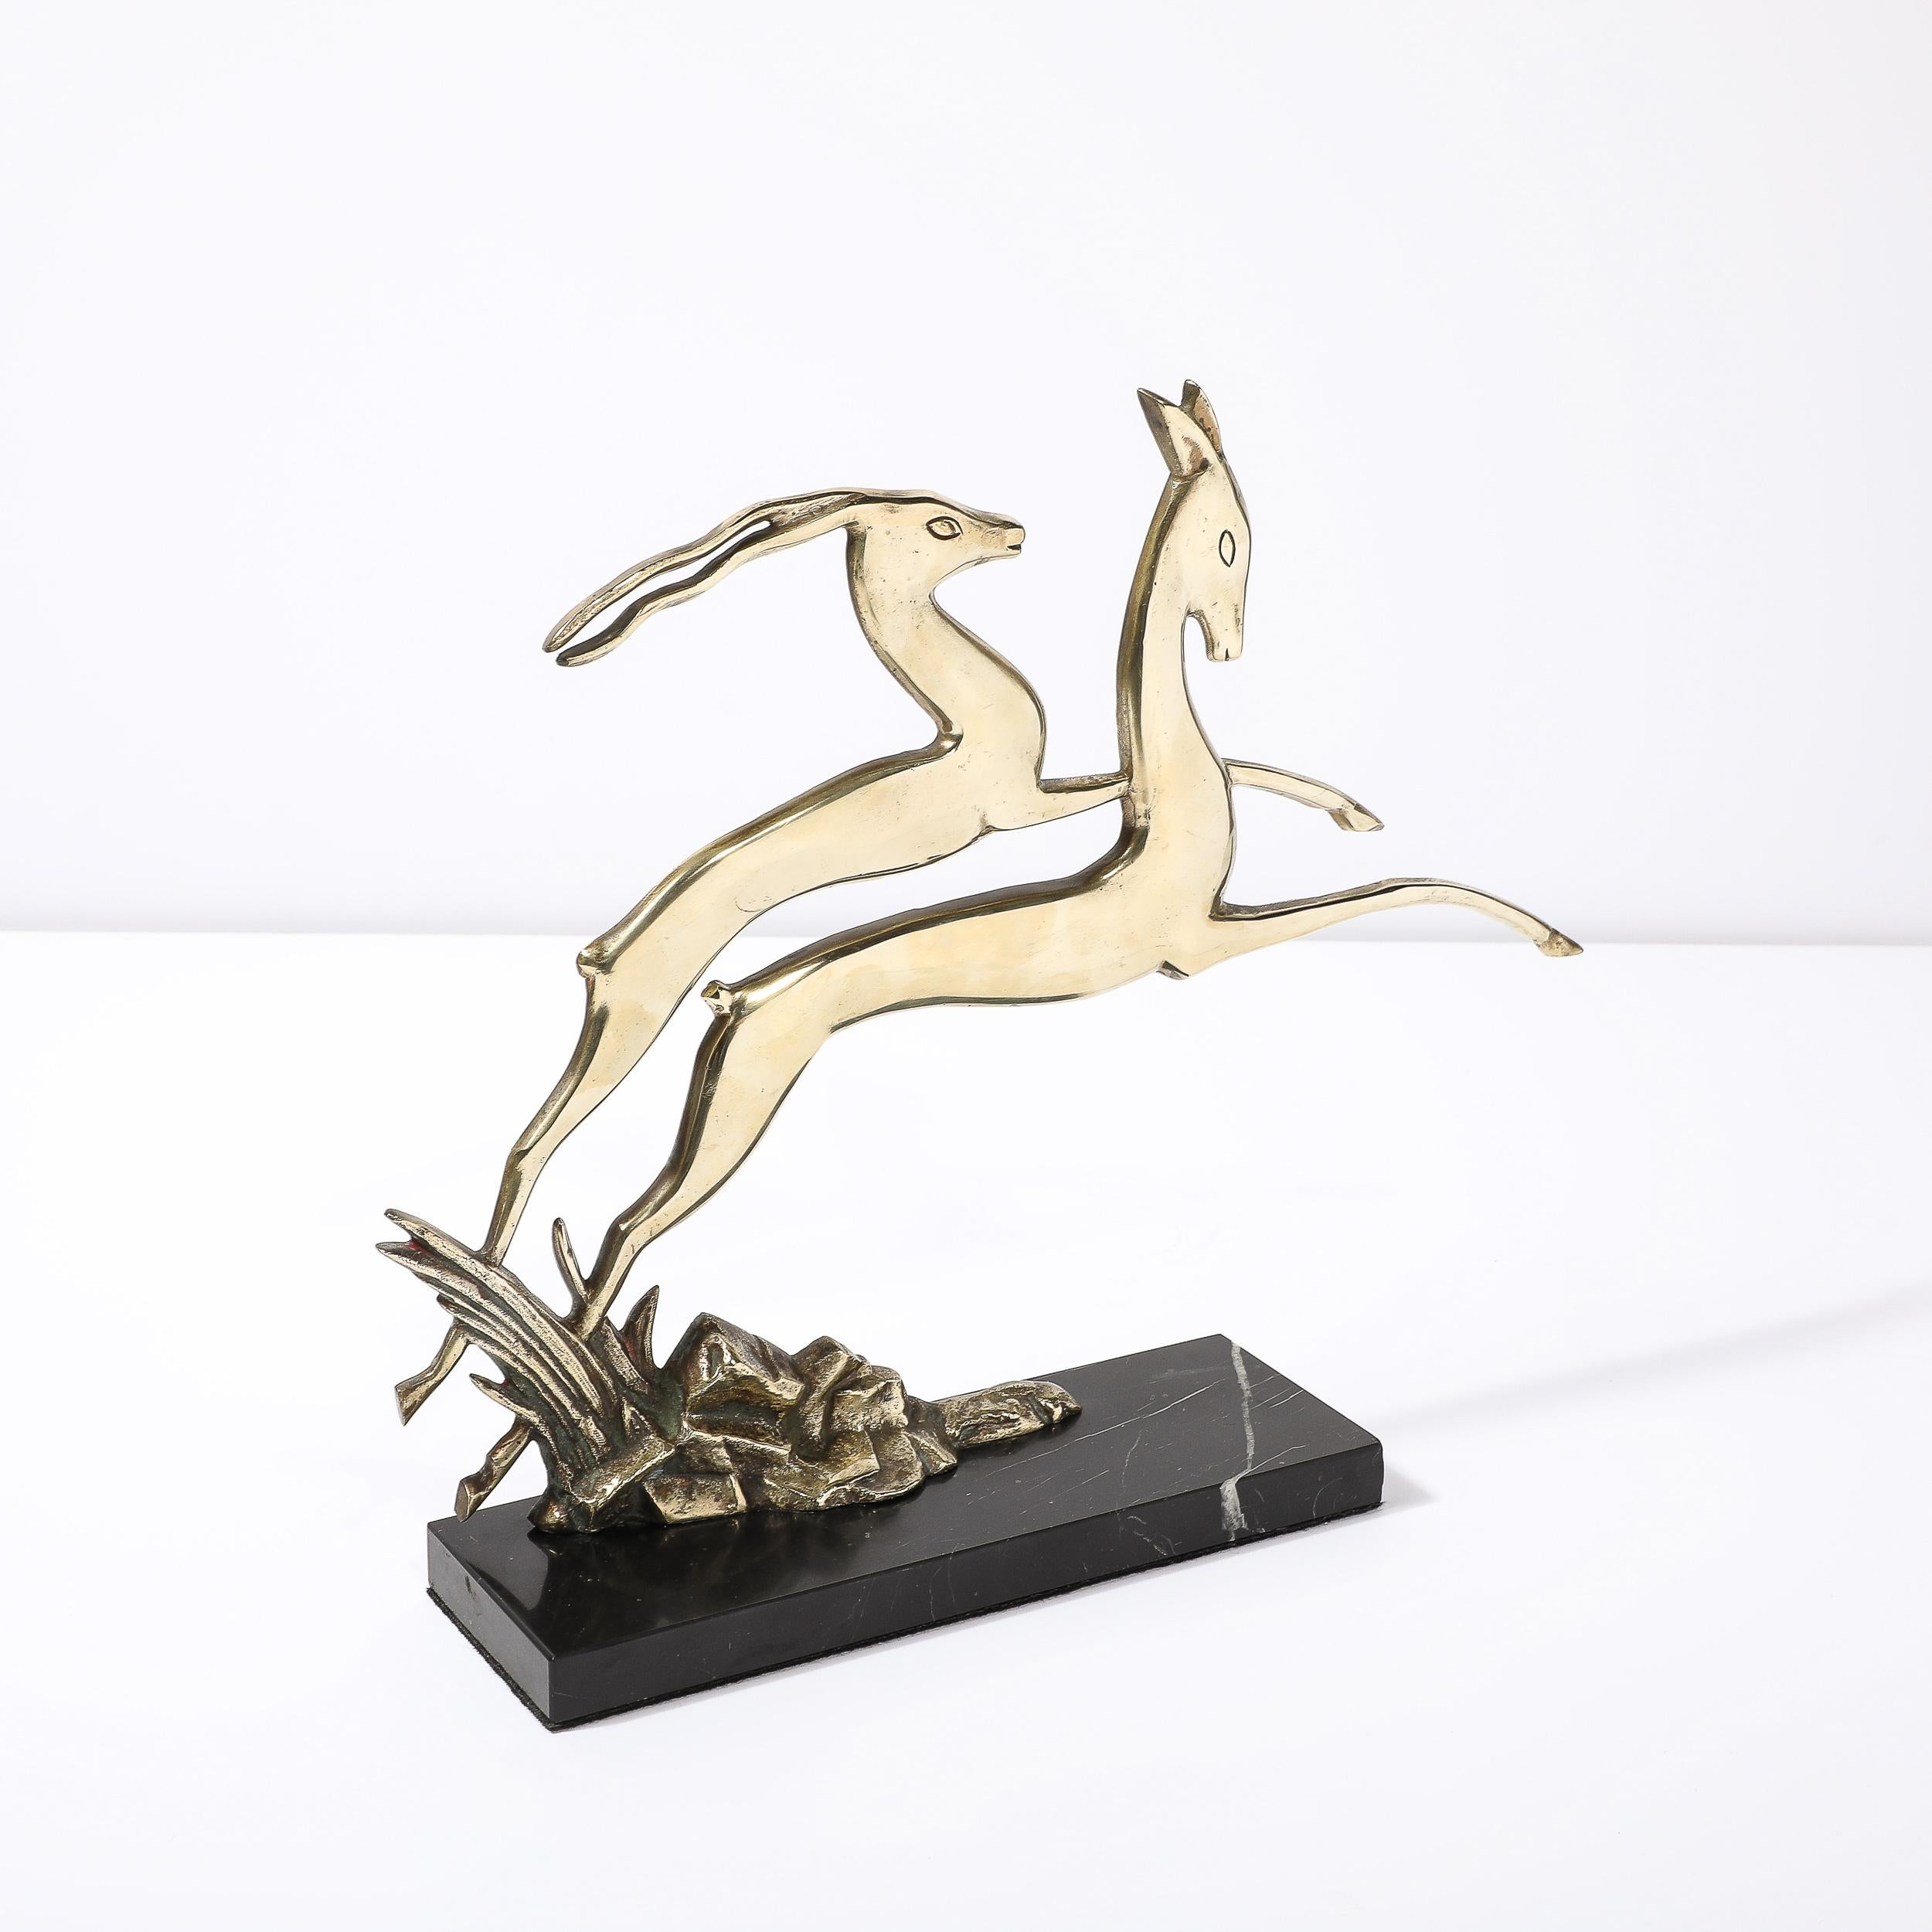 Art Deco Leaping Gazelle Sculpture in Polished Brass on Black Marble Base For Sale 5